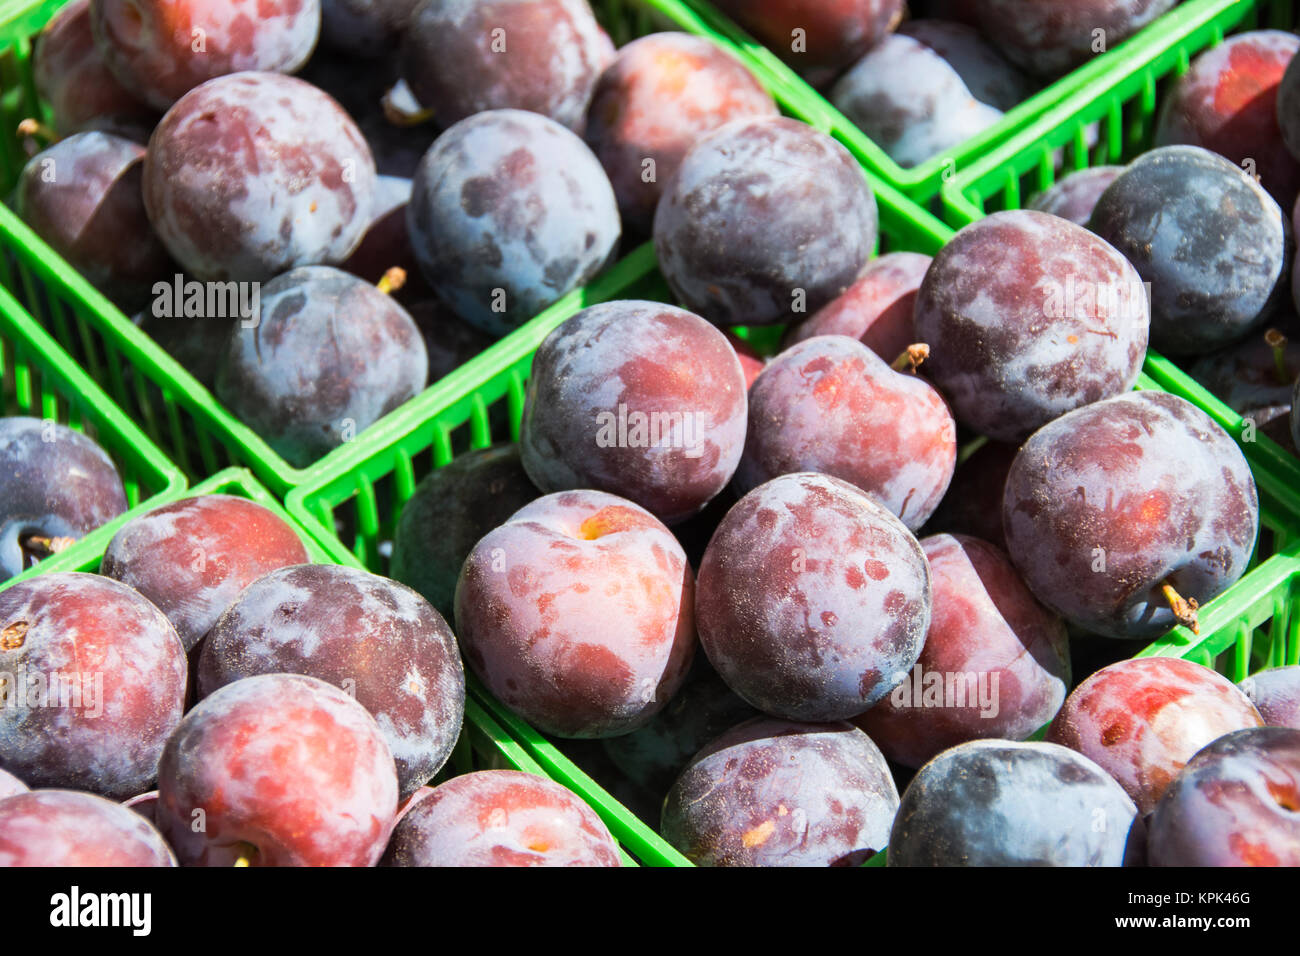 Green plastic baskets of freshly picked prunes are filling the image; Waupoose, Ontario, Canada Stock Photo